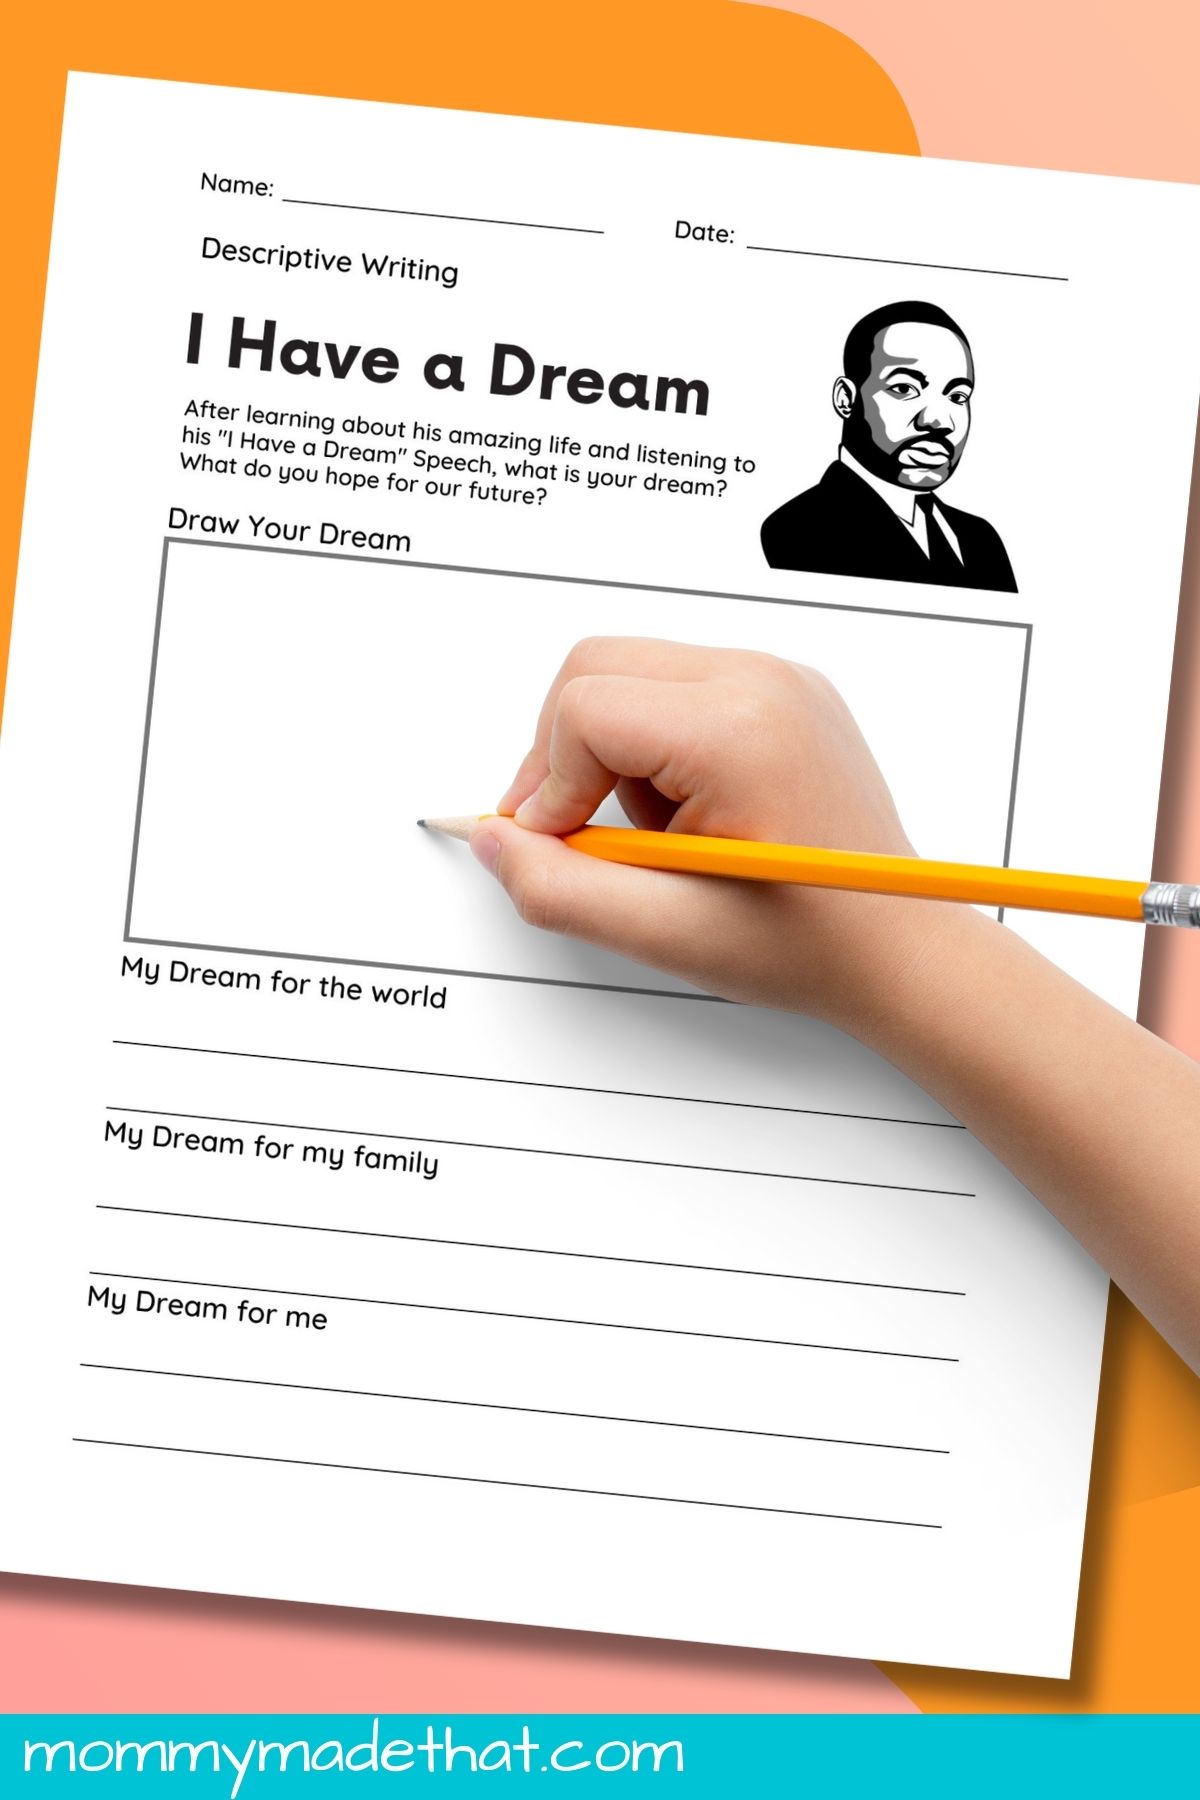 I have a dream martin luther king worksheet.